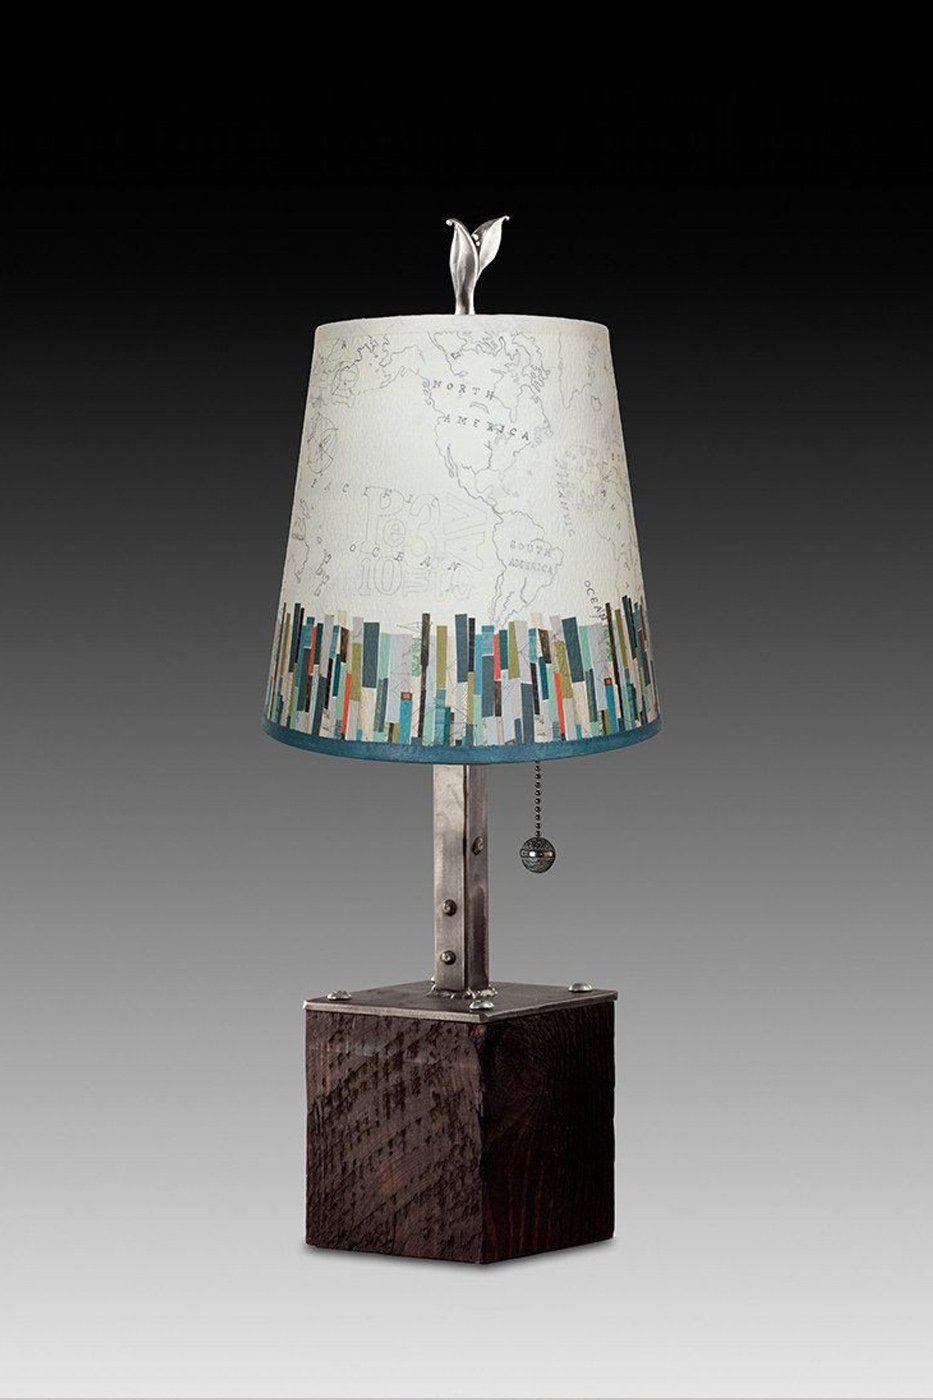 Janna Ugone &amp; Co Table Lamps Steel Table Lamp on Reclaimed Wood with Small Drum Shade in Papers Edge